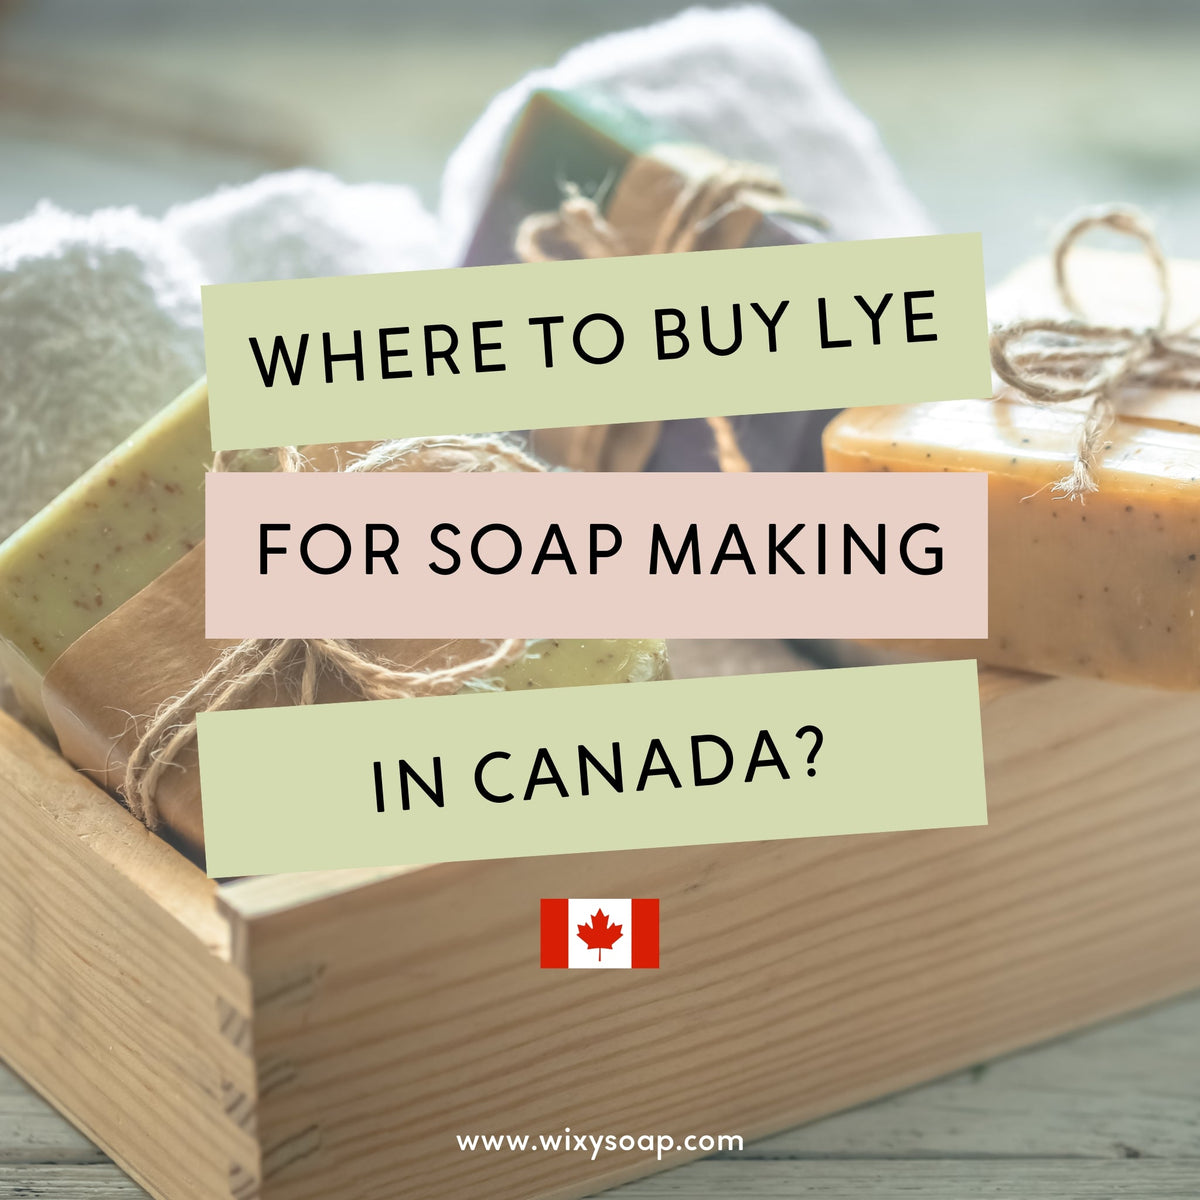 Where to buy lye for soap making in Canada? – Wixy Soap